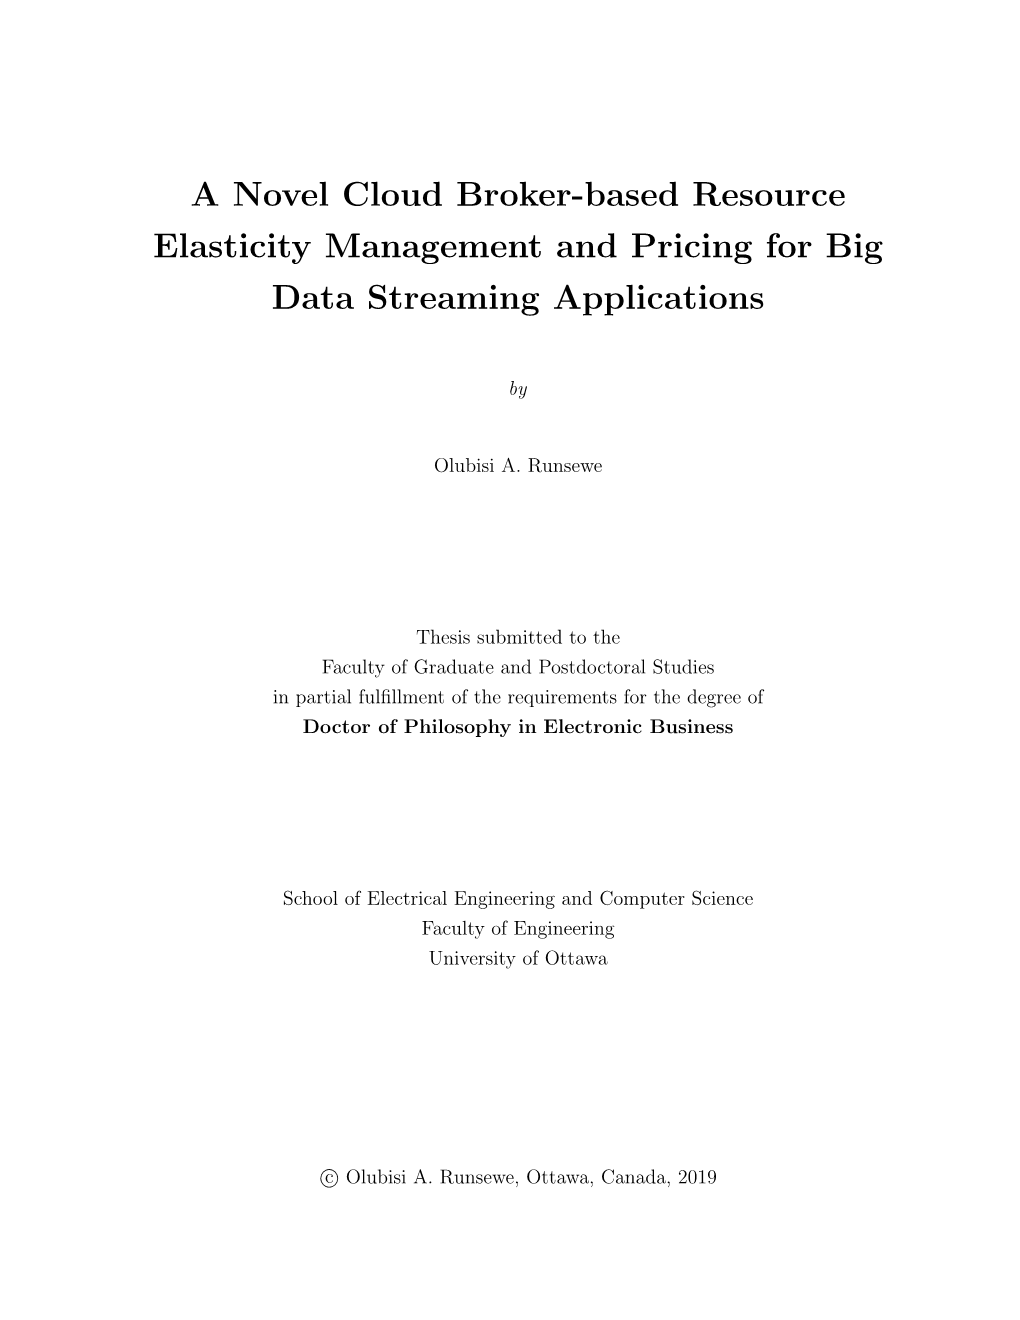 A Novel Cloud Broker-Based Resource Elasticity Management and Pricing for Big Data Streaming Applications